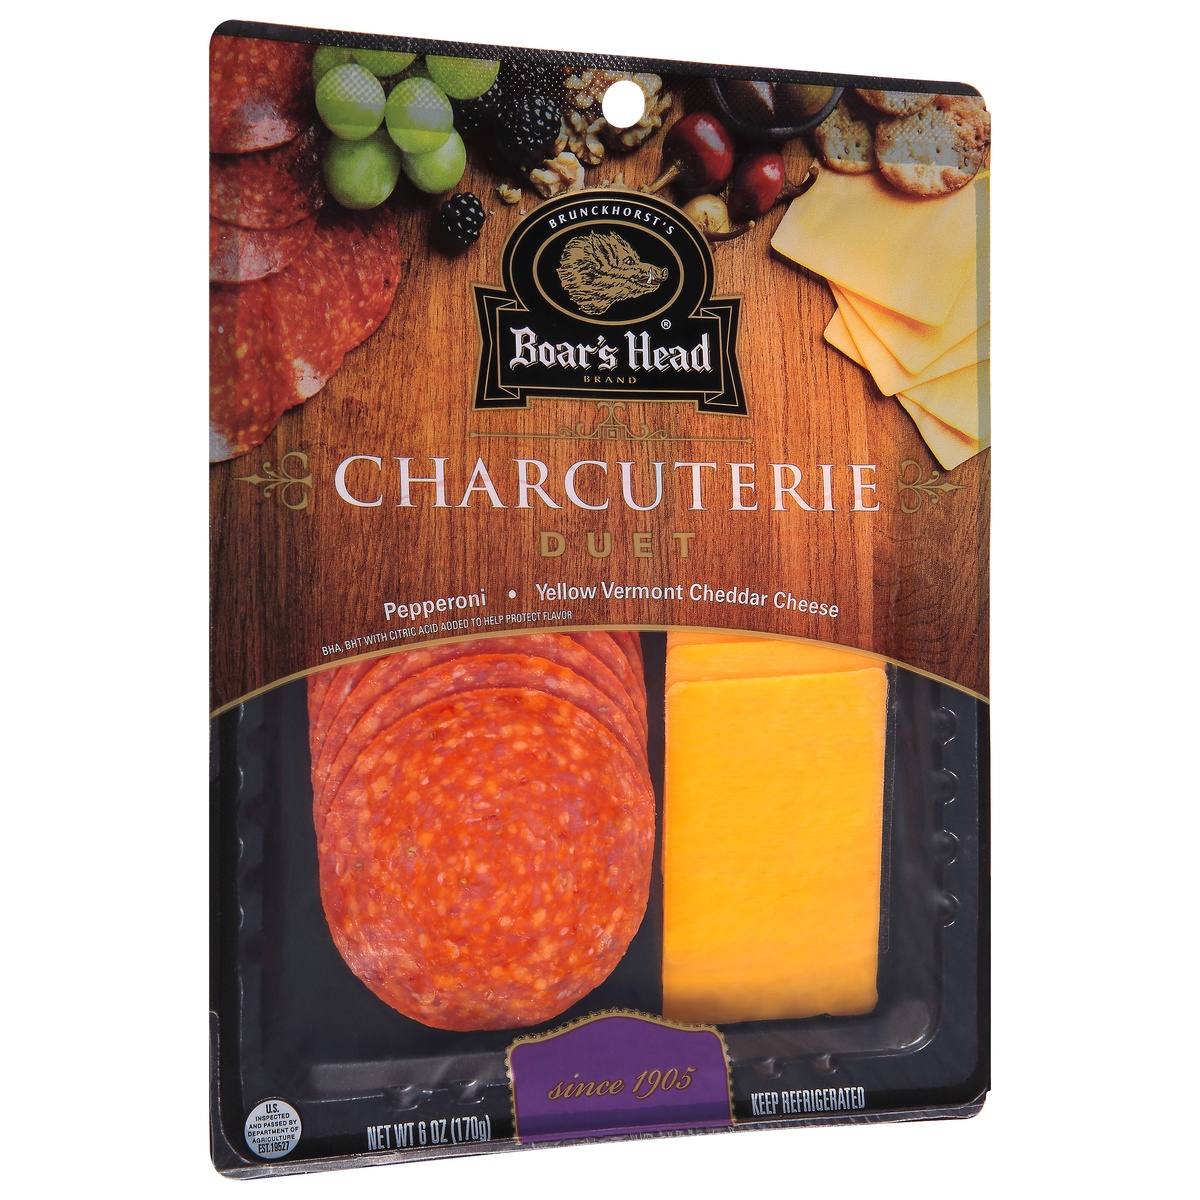 slide 11 of 11, Boar's Head Charcuterie, Duet, Pepperoni & Yellow Vermont Cheddar Cheese, 1 ct